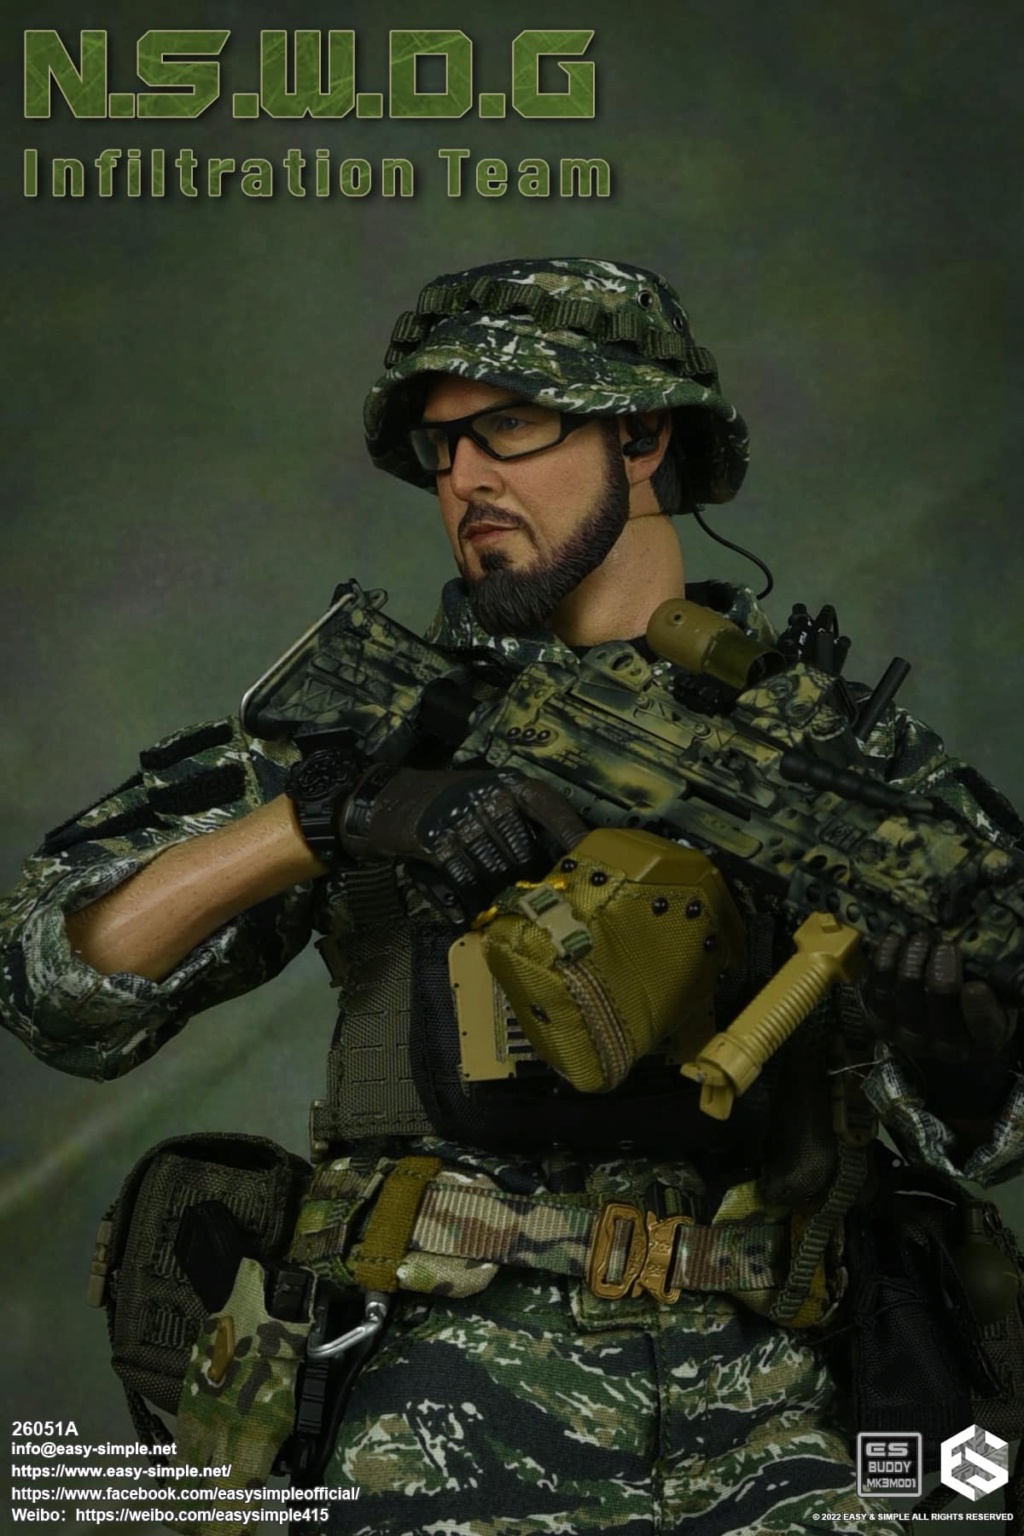 ModernMilitary - NEW PRODUCT: EASY AND SIMPLE 1/6 SCALE FIGURE: N.S.W.D.G INFILTRATION TEAM - (2 Versions) 11854